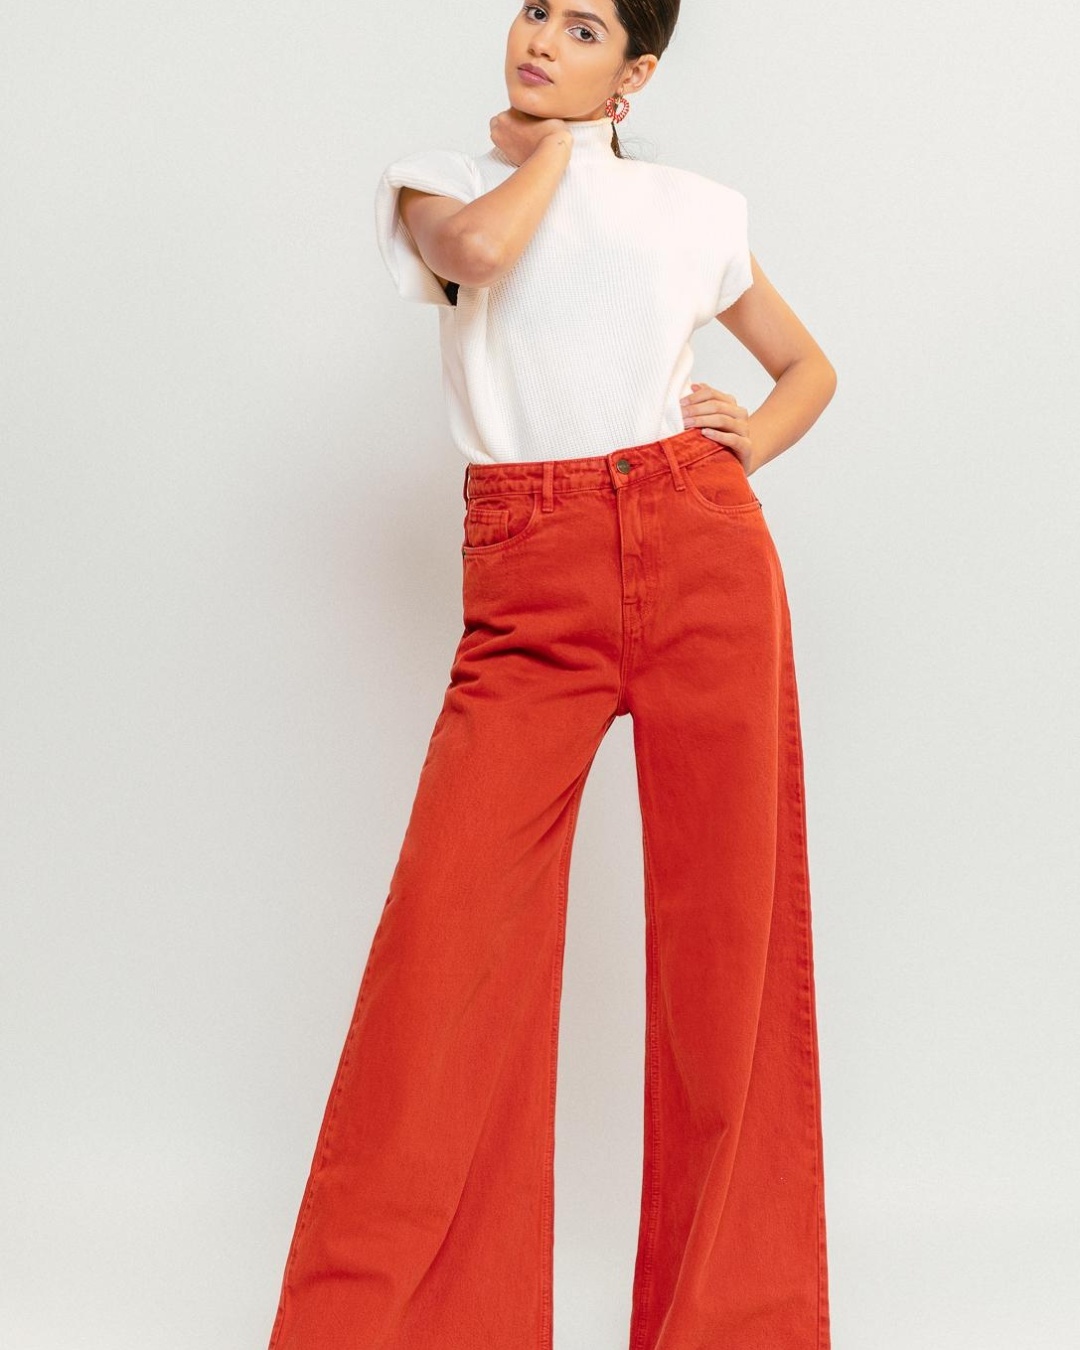 Buy Women's Red Flared Jeans Online